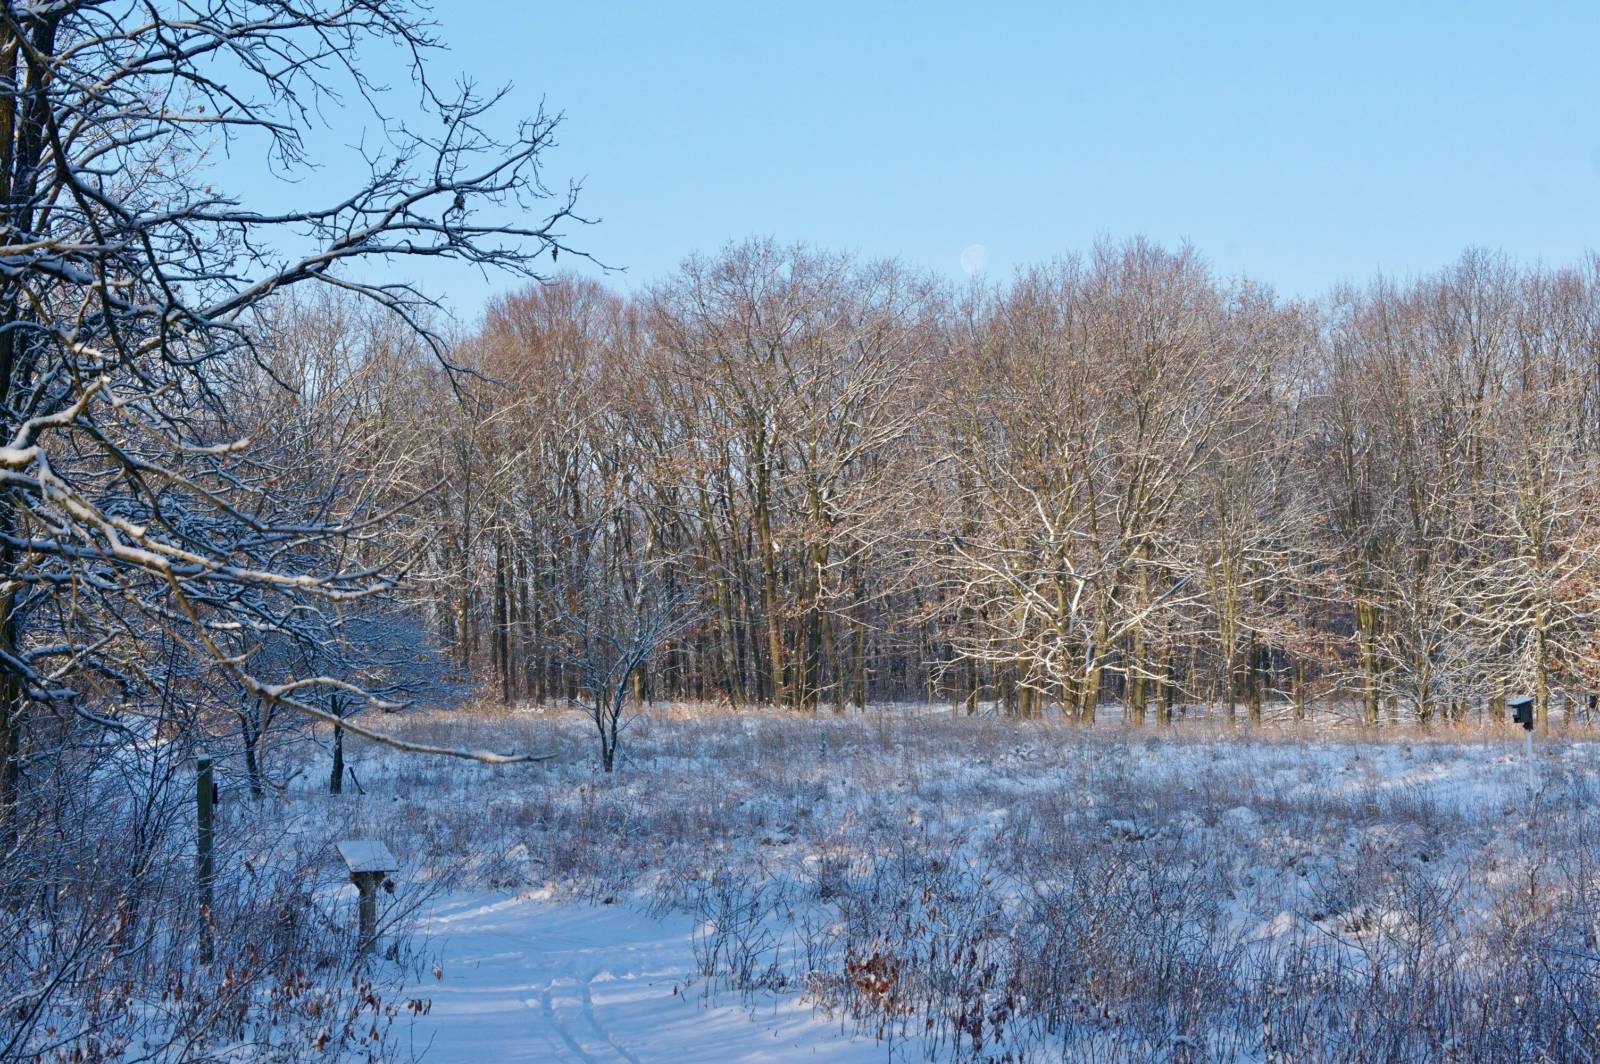 scenic view of the Riveredge prairie in winter with a light layer of snow and trees in the background